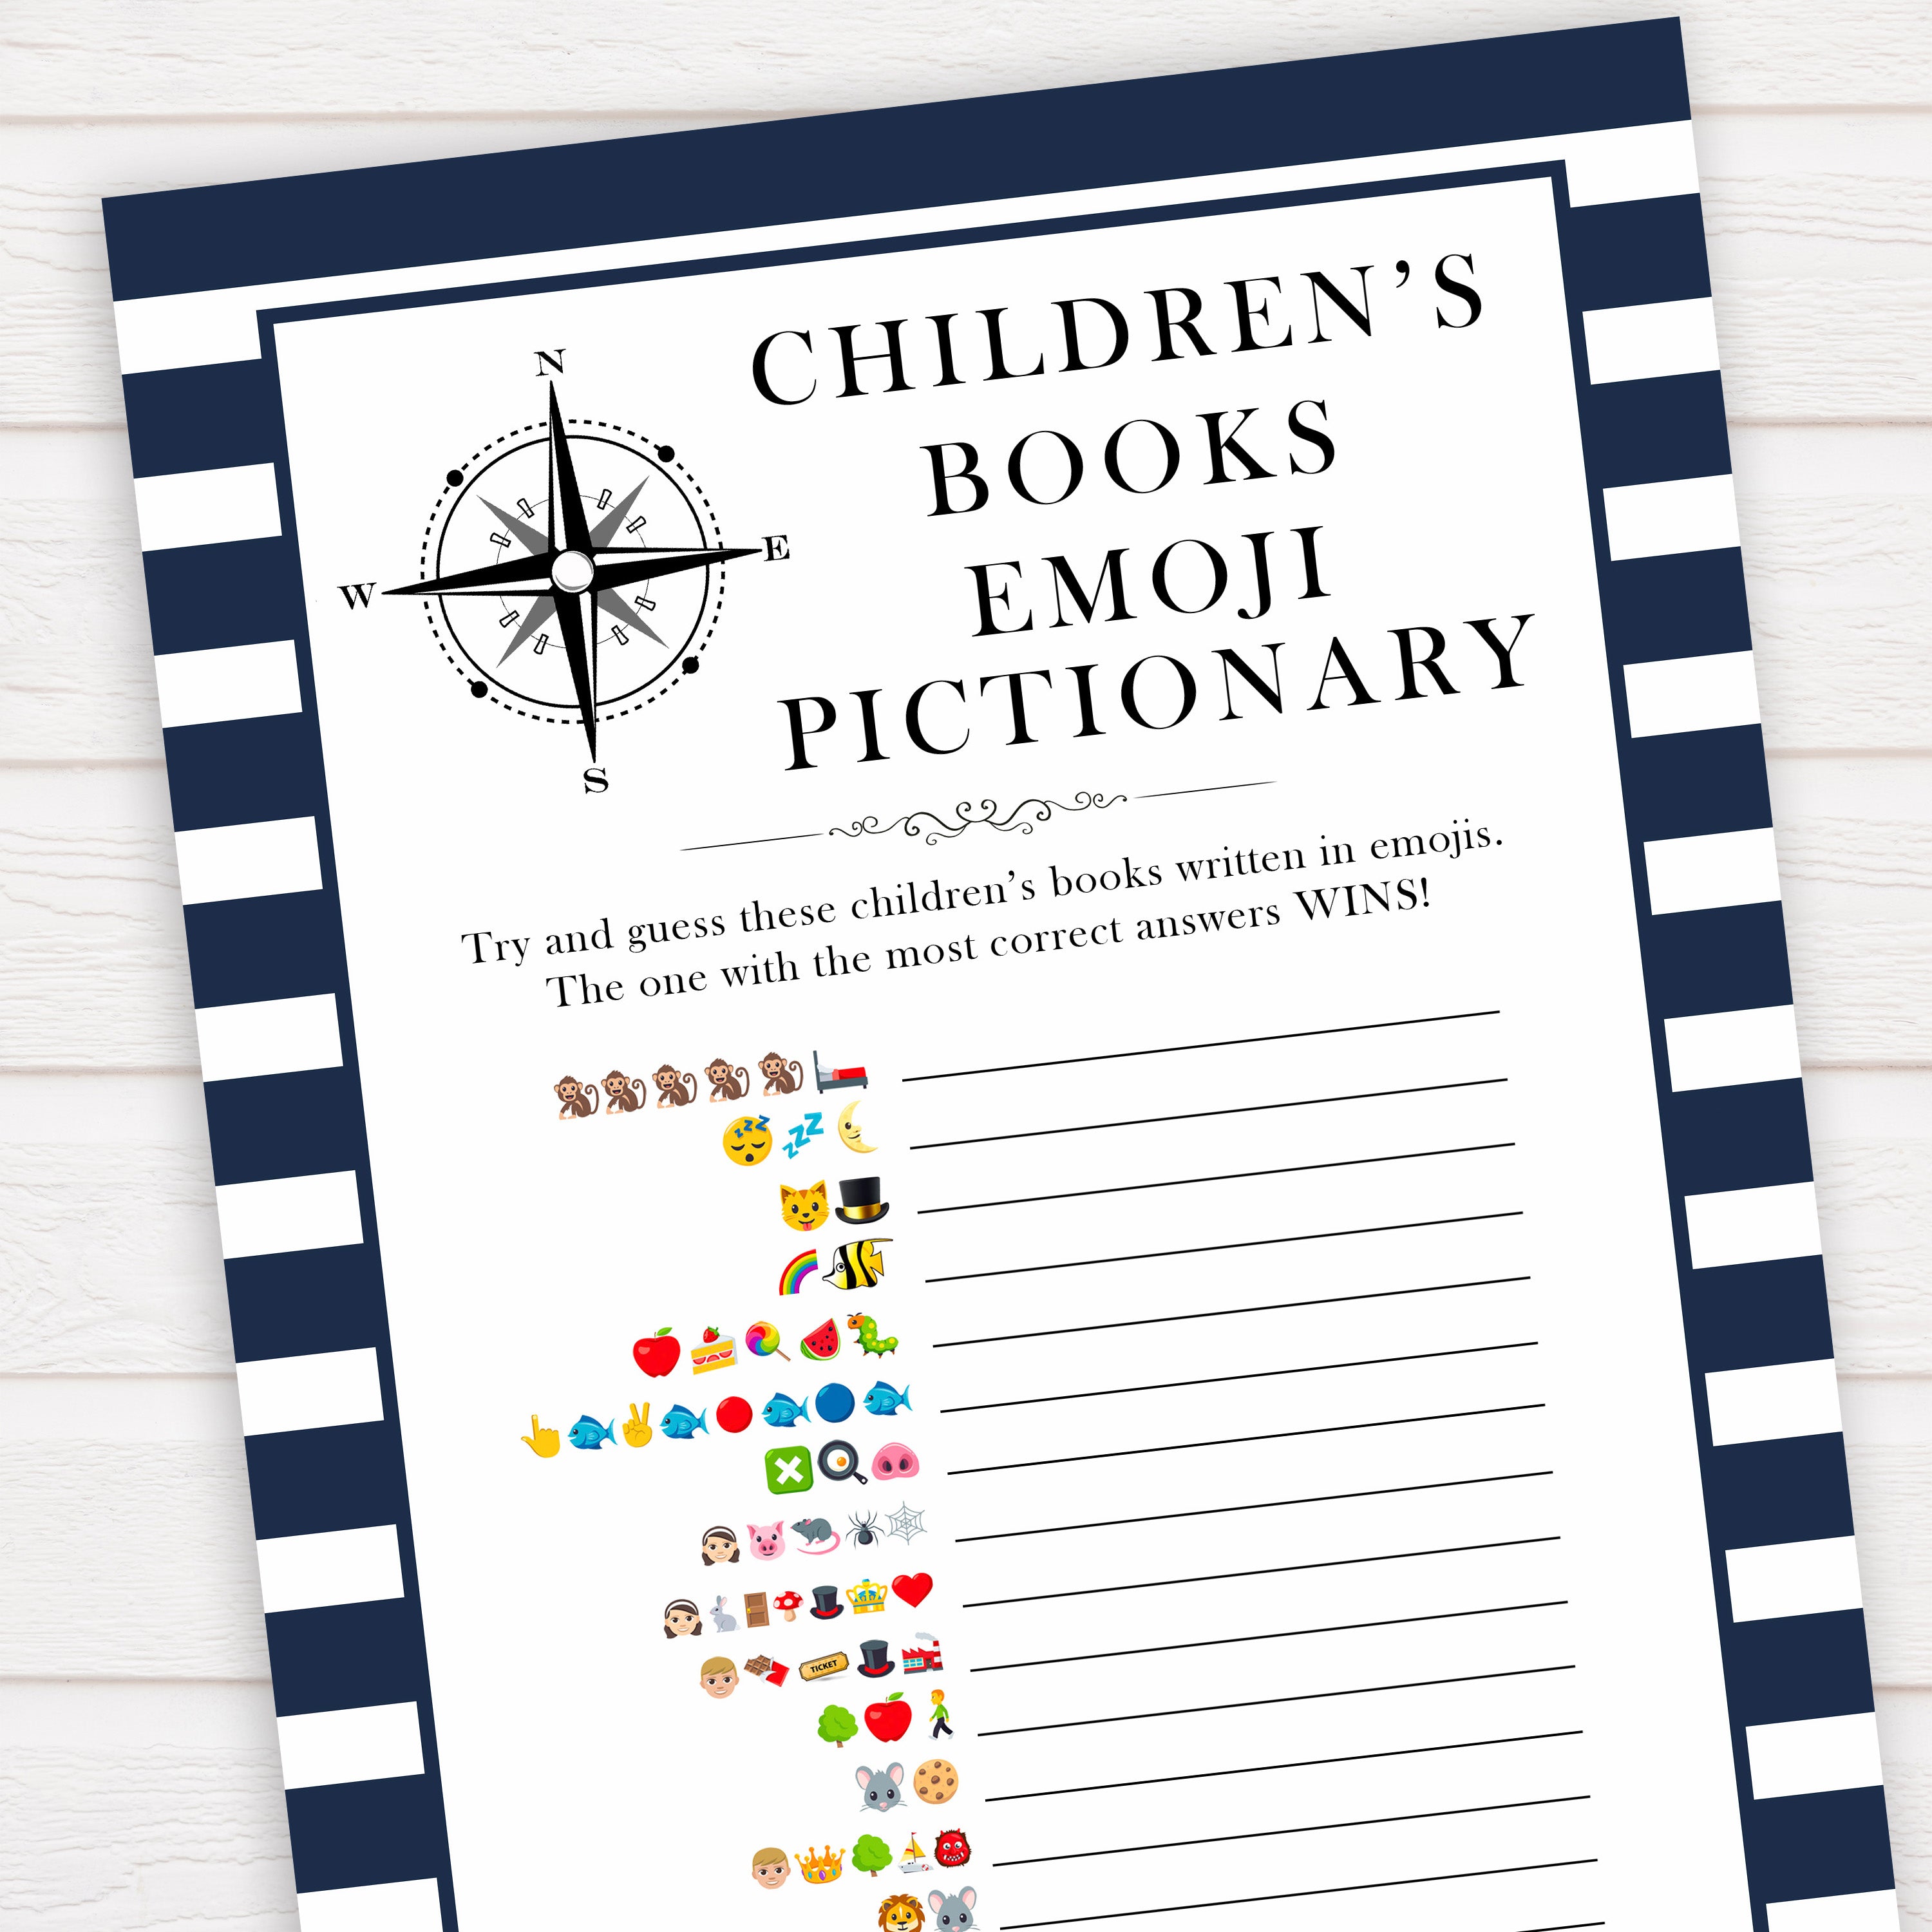 Nautical baby shower games, childrens books emoji pictionary baby shower games, printable baby shower games, baby shower games, fun baby games, ahoy its a boy, popular baby shower games, sailor baby games, boat baby games